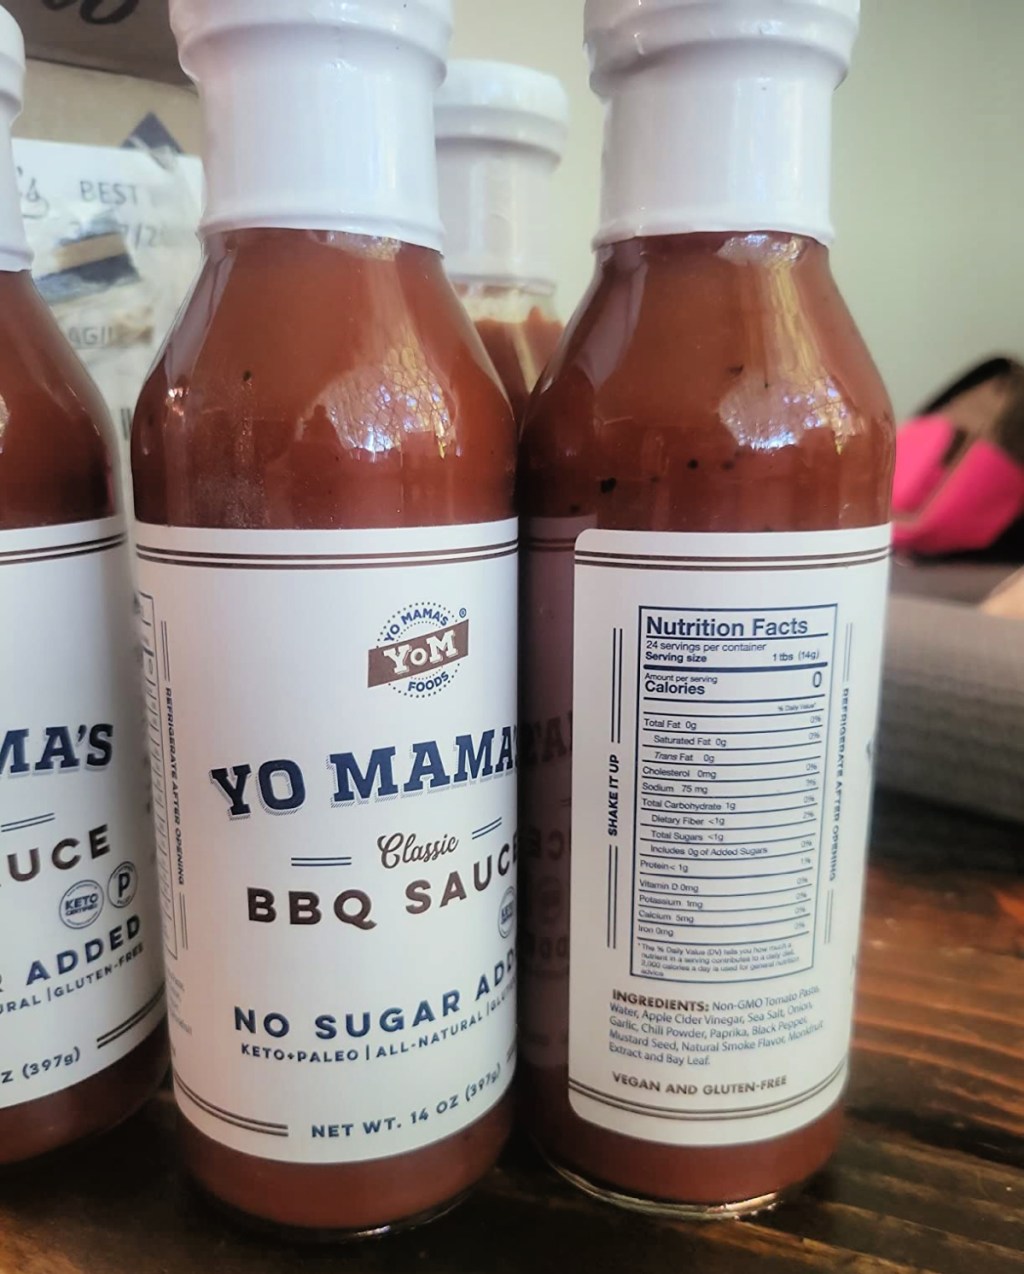 Bottles of Yo Mama BBQ Sauce which is keto friendly and low carb